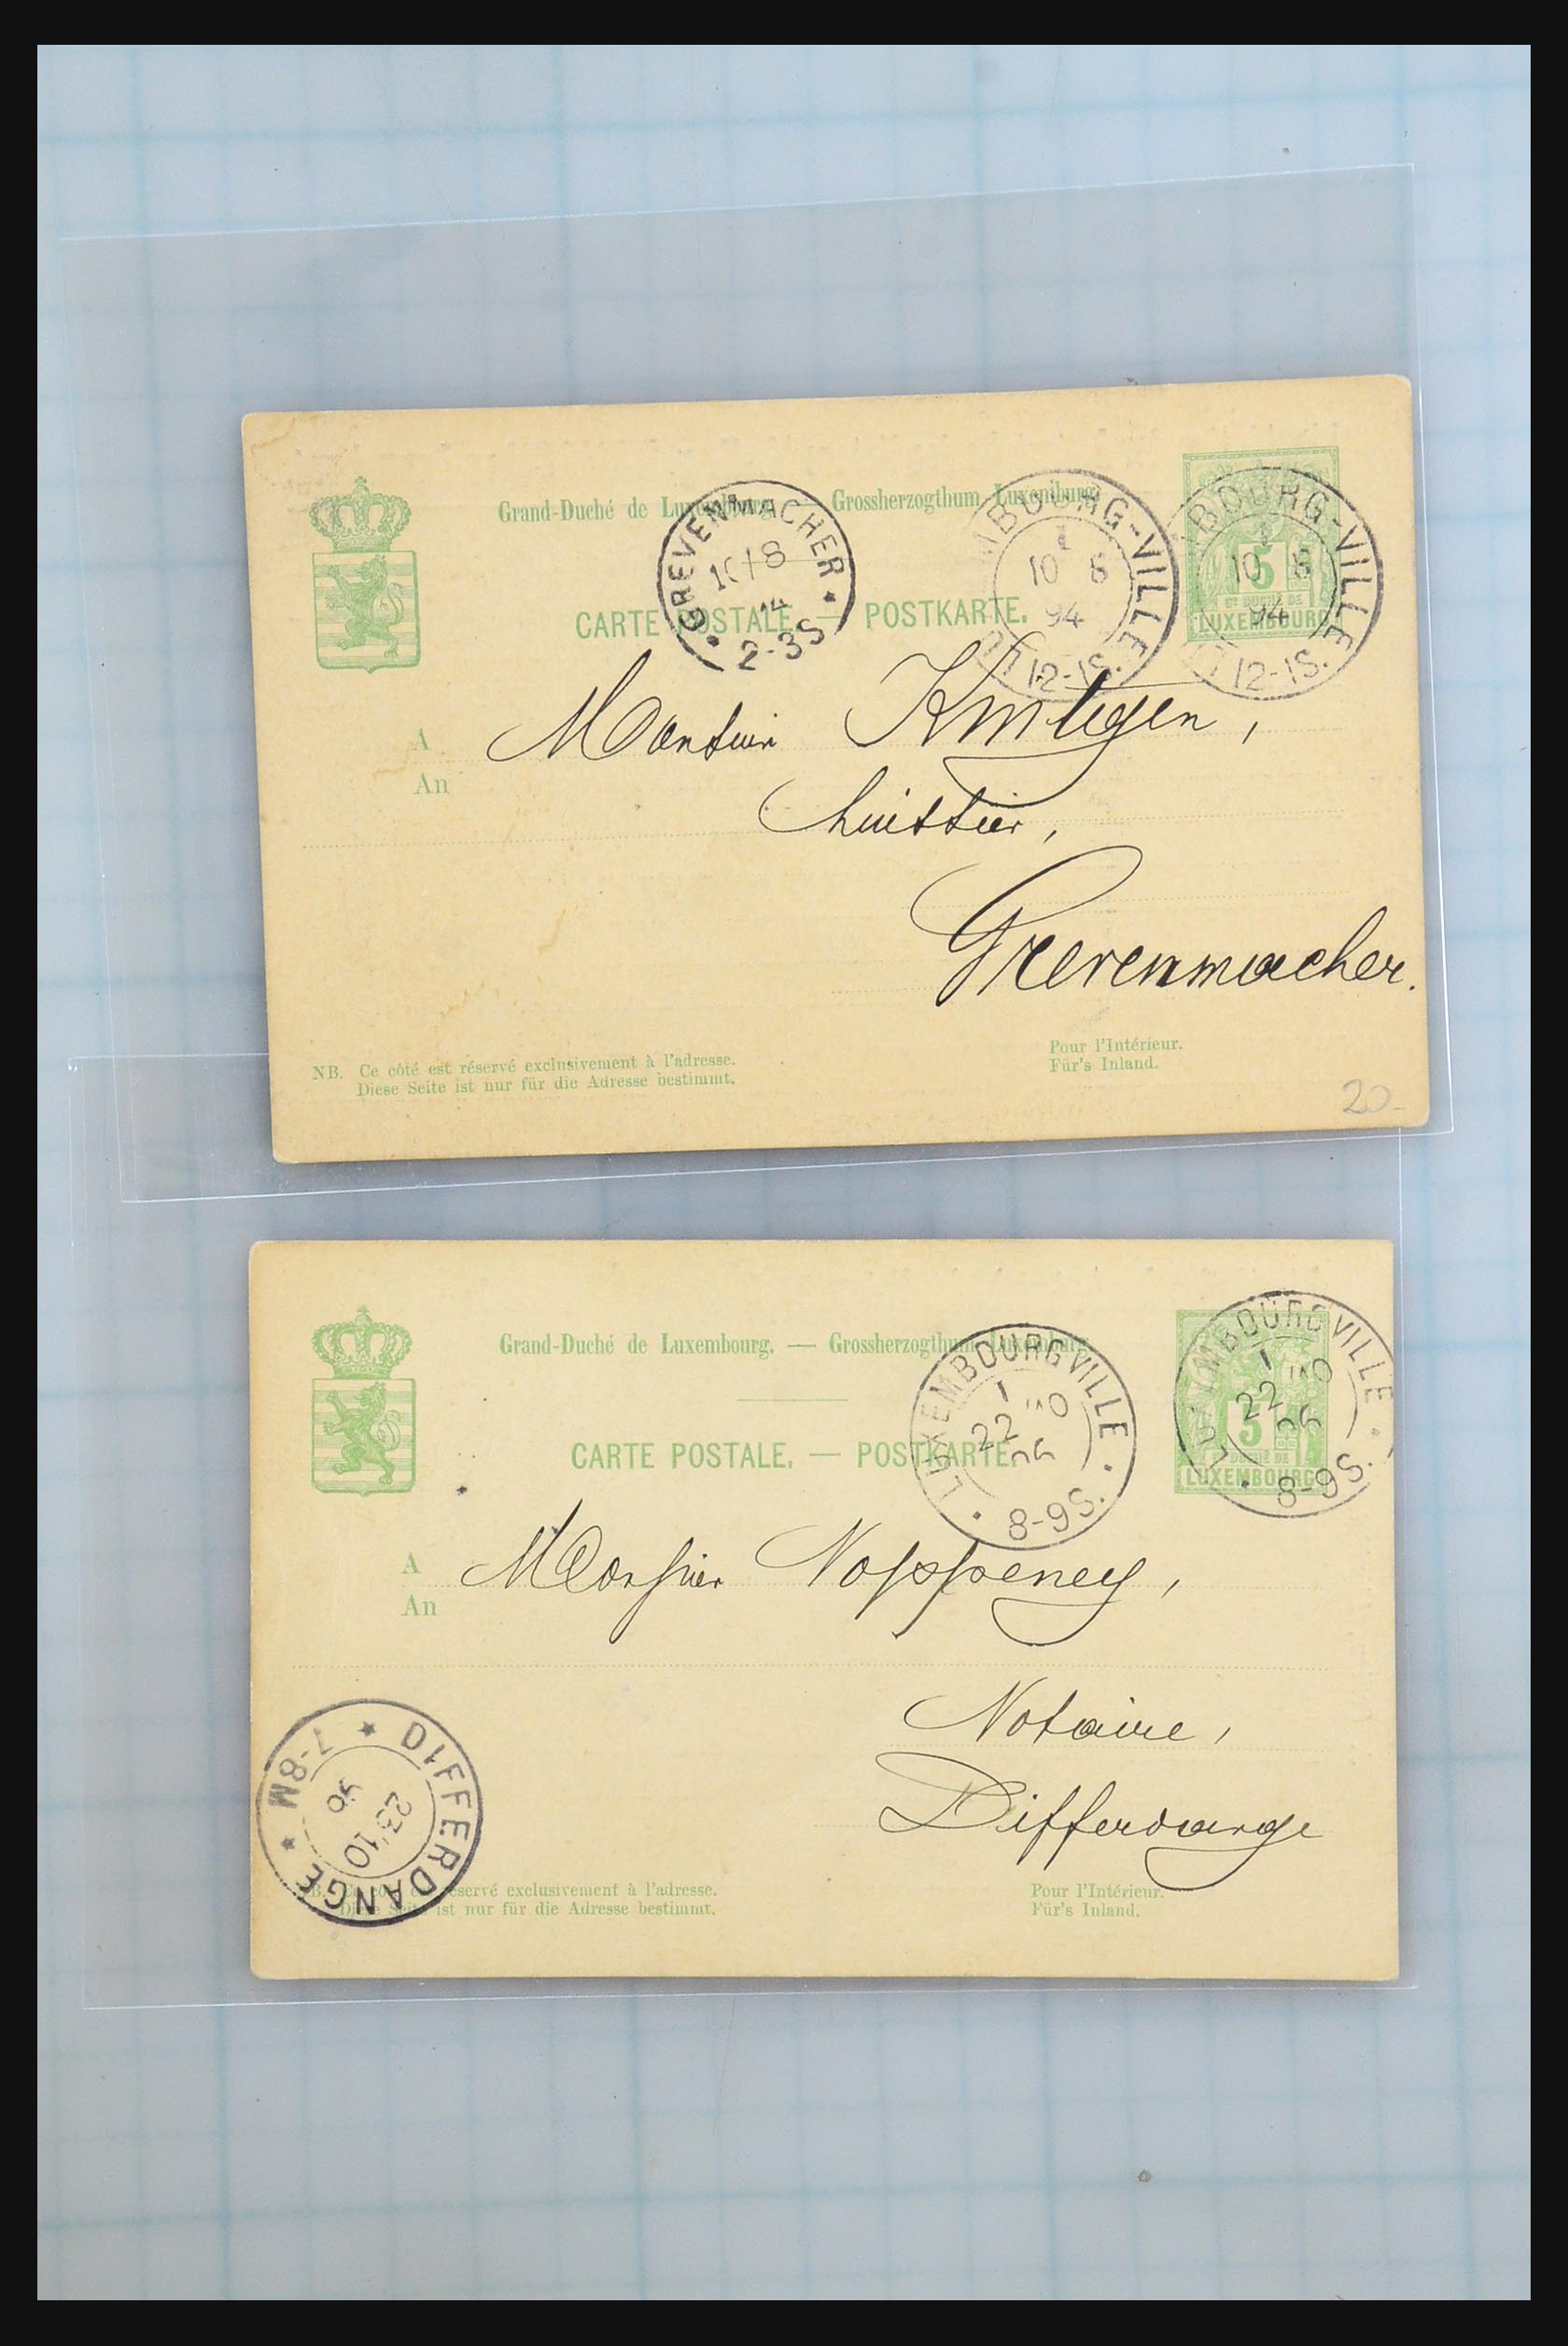 31358 060 - 31358 Portugal/Luxemburg/Greece covers 1880-1960.